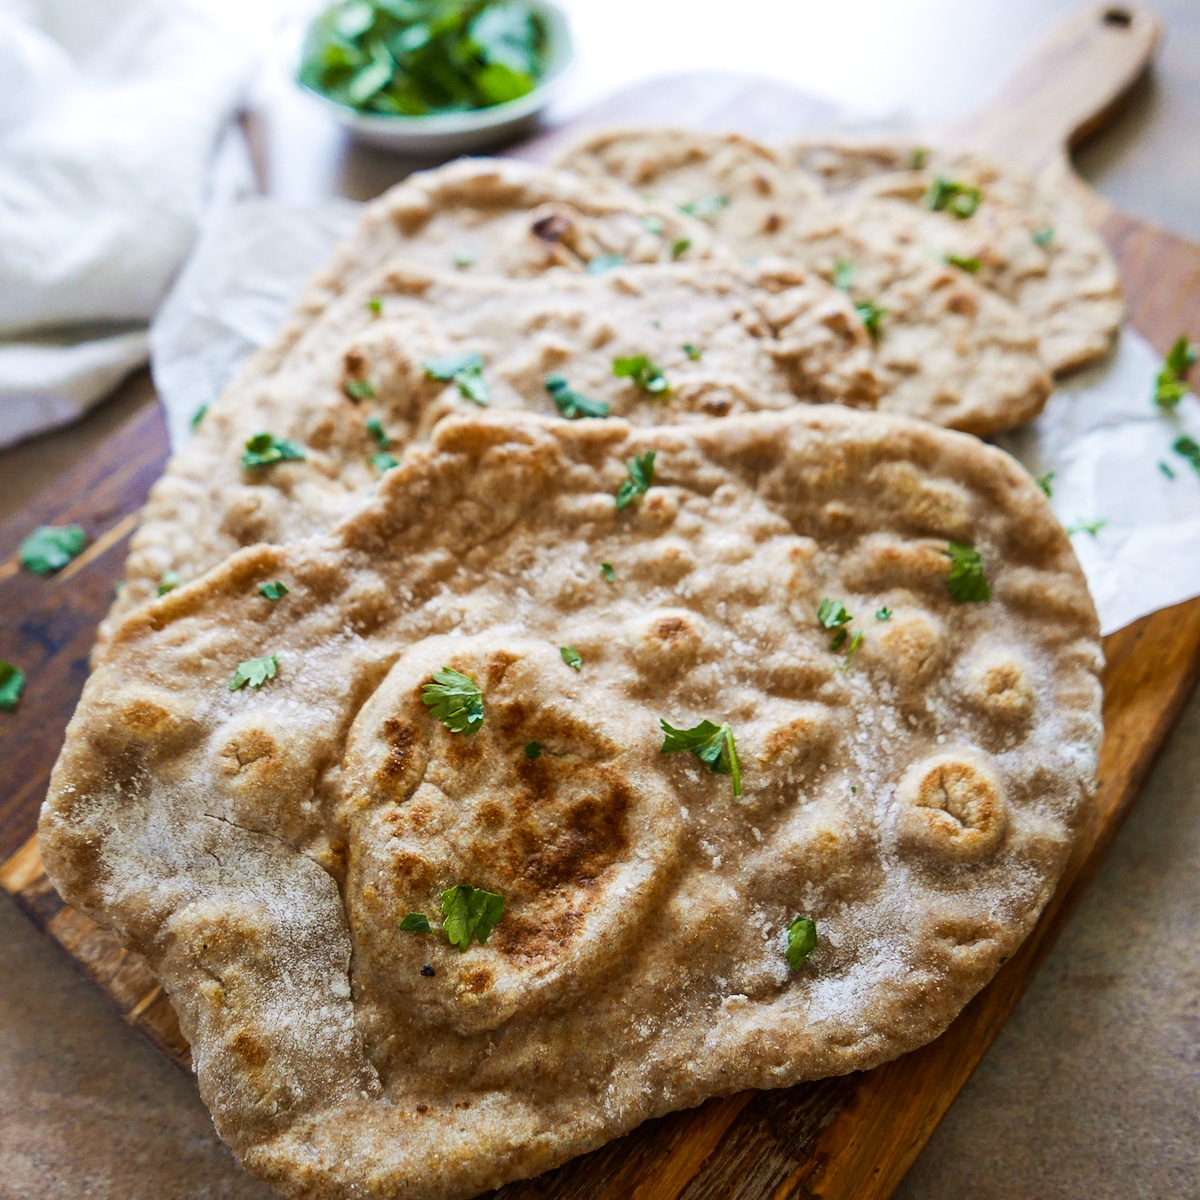 Five pieces of golden brown naan arranged on a wooden board and garnished with chopped cilantro.